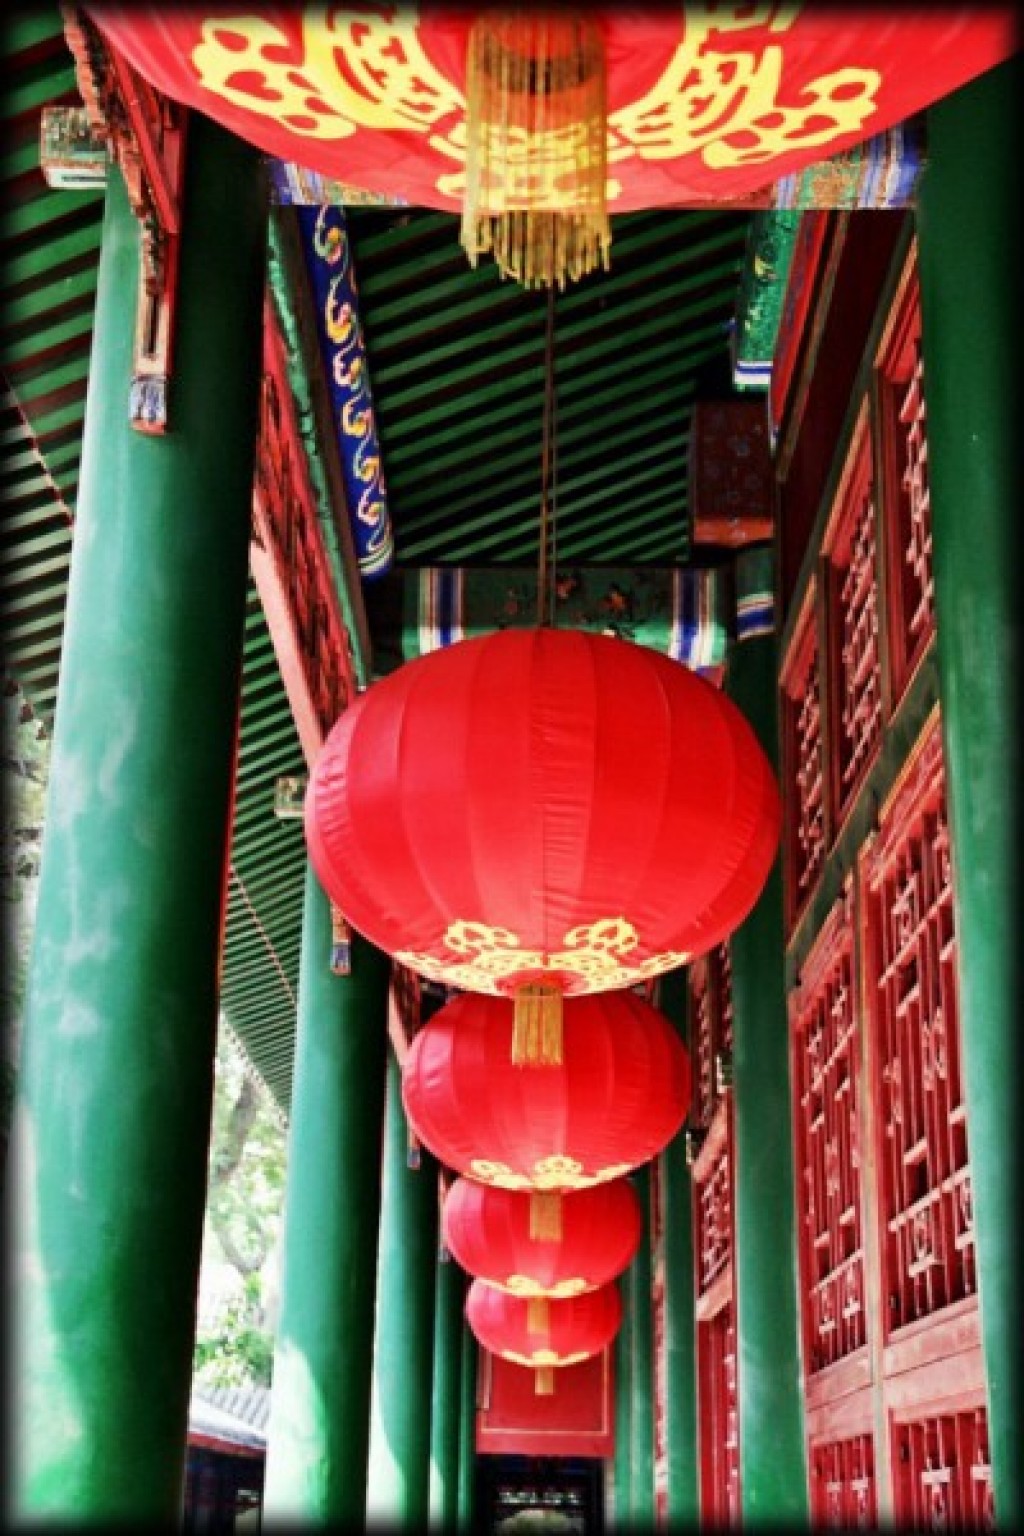 We visited Prince Gong's Mansion in Beijing.